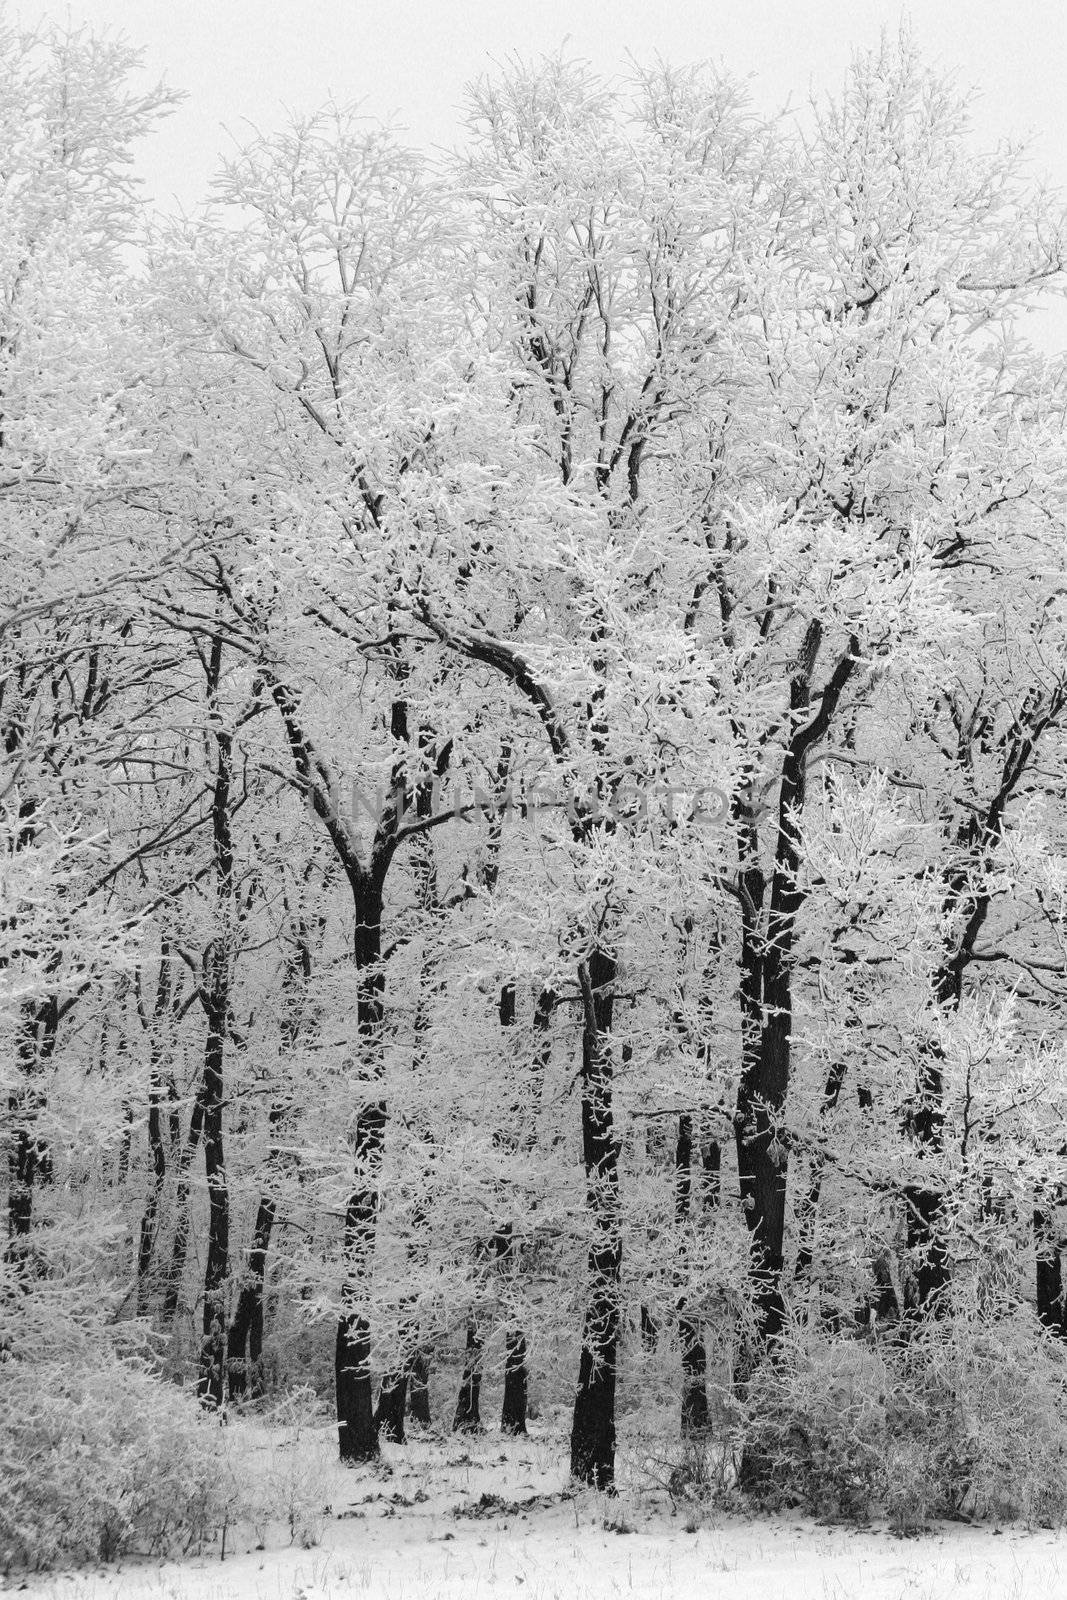 Winter Forest In Black And White by Digoarpi